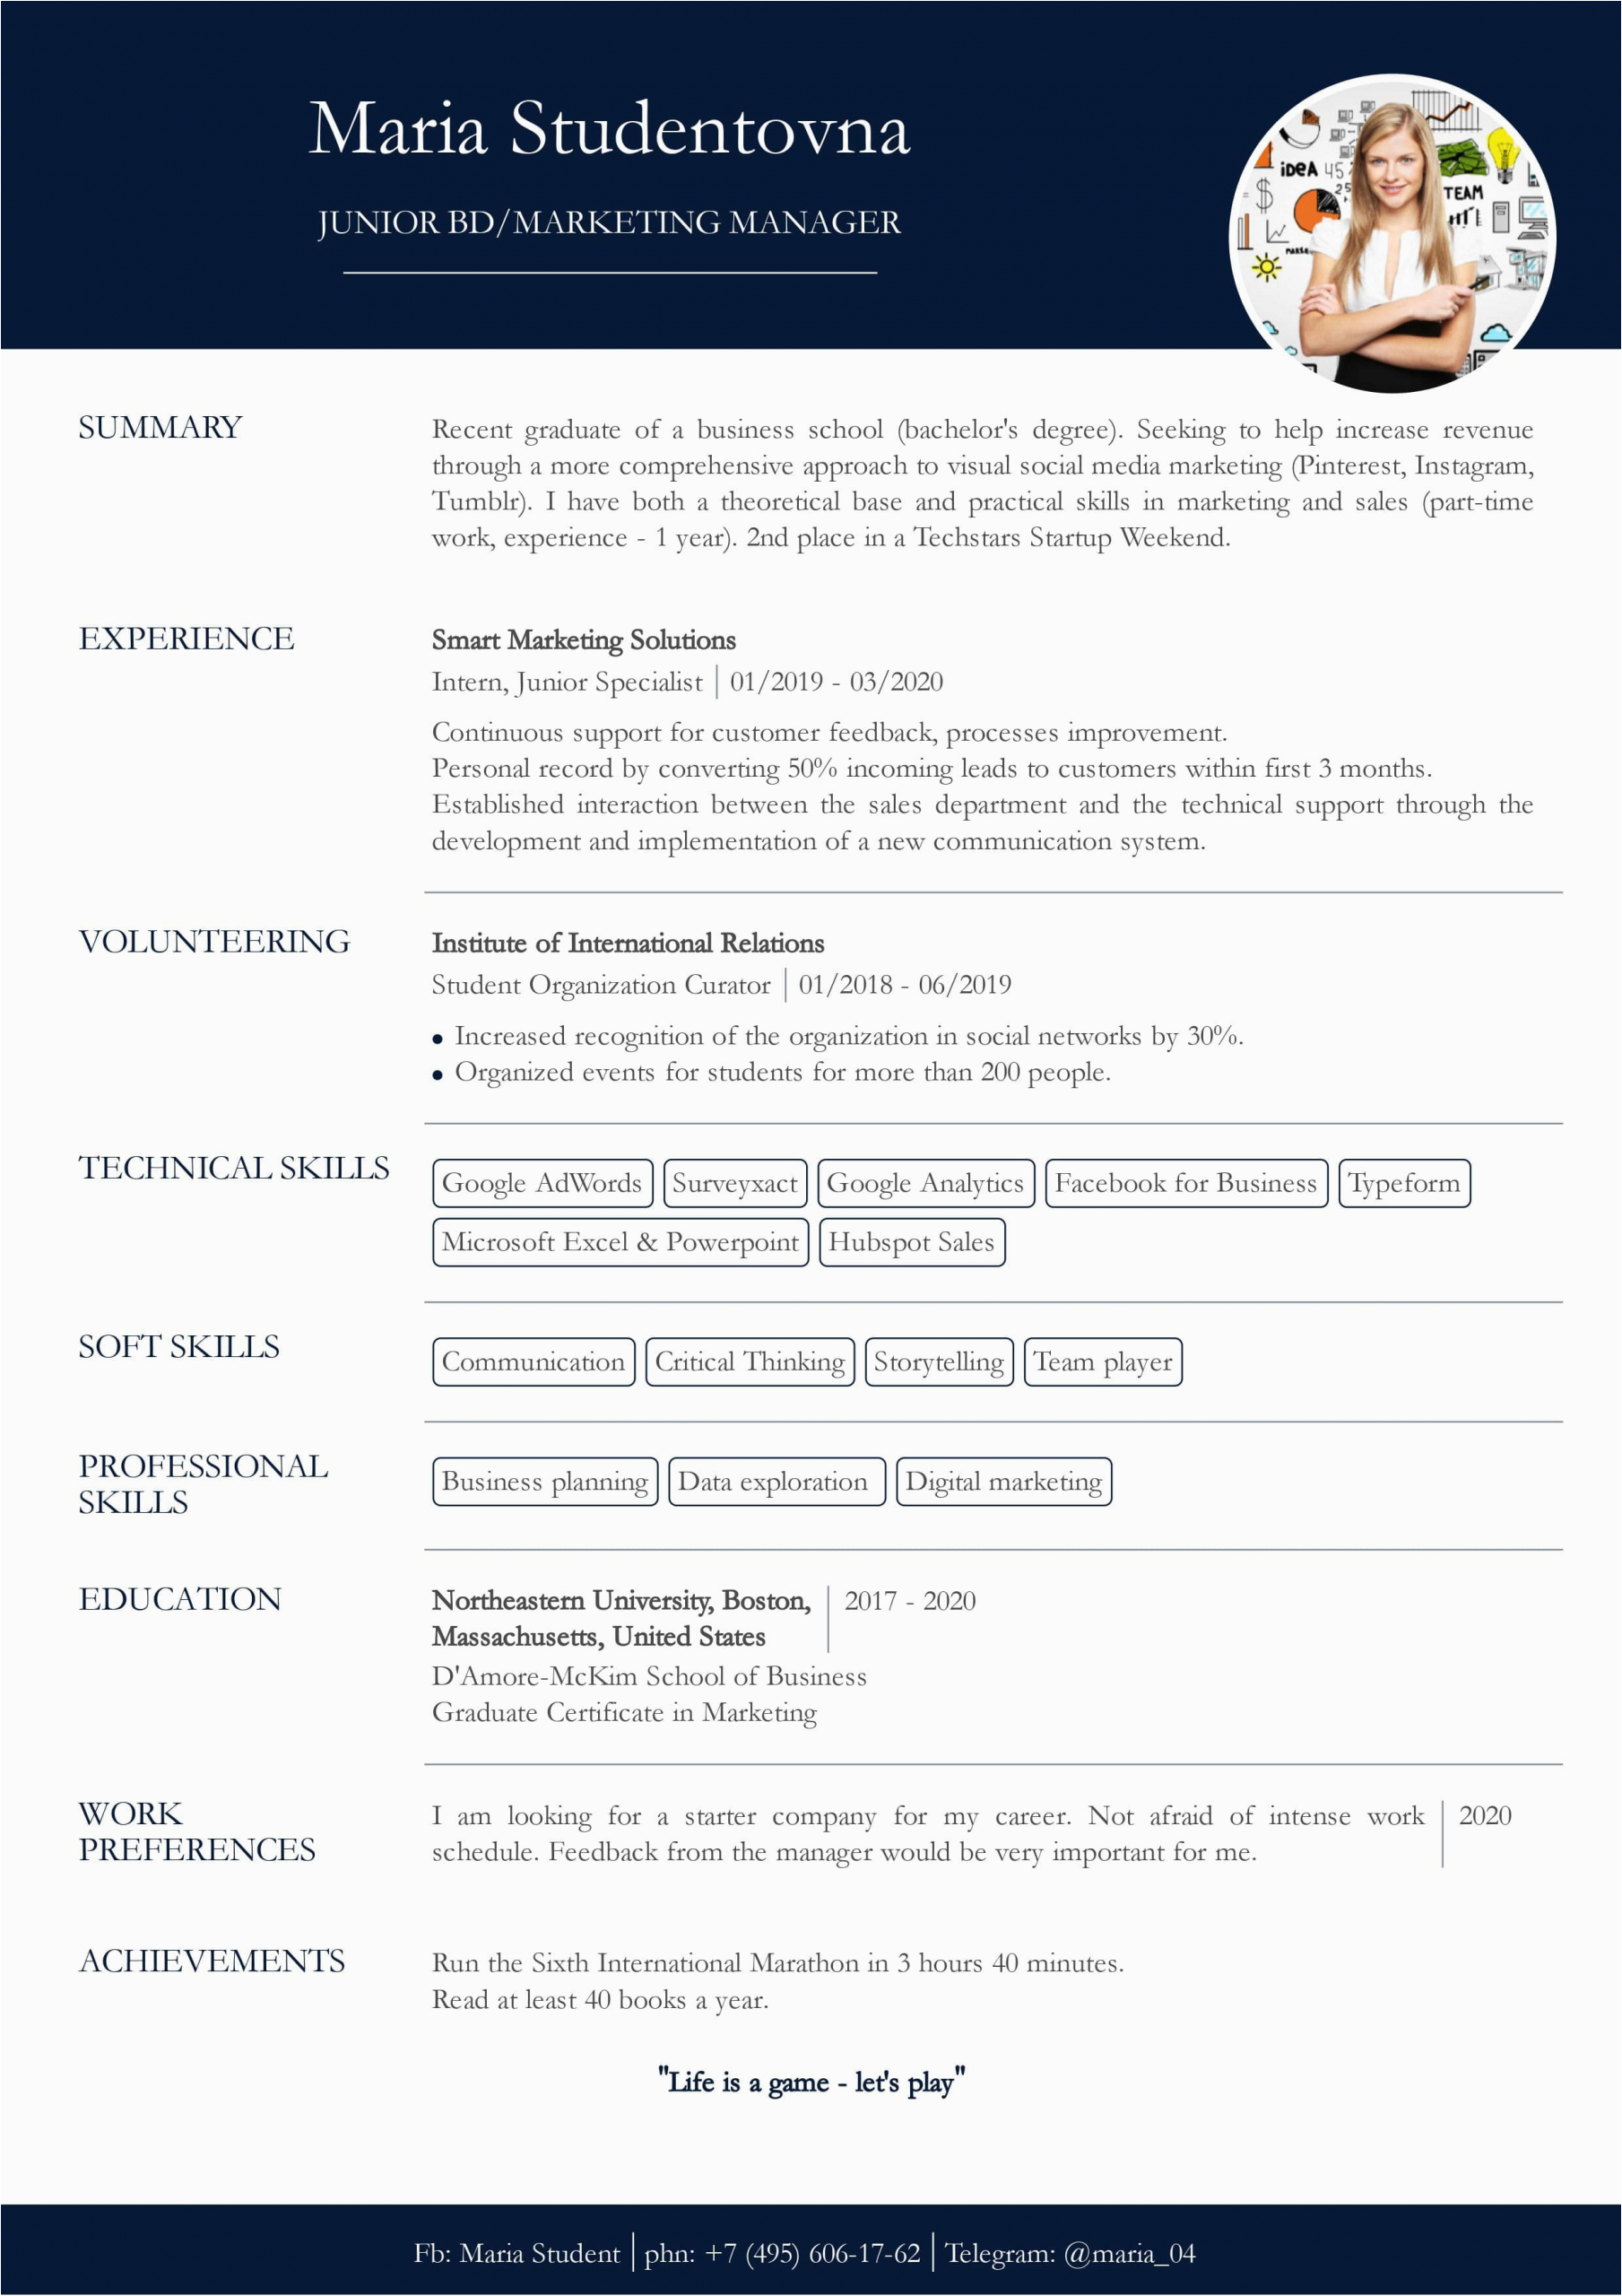 Sample Resume for It Students with No Experience Resume with No Work Experience Sample for Students Cv2you Blog